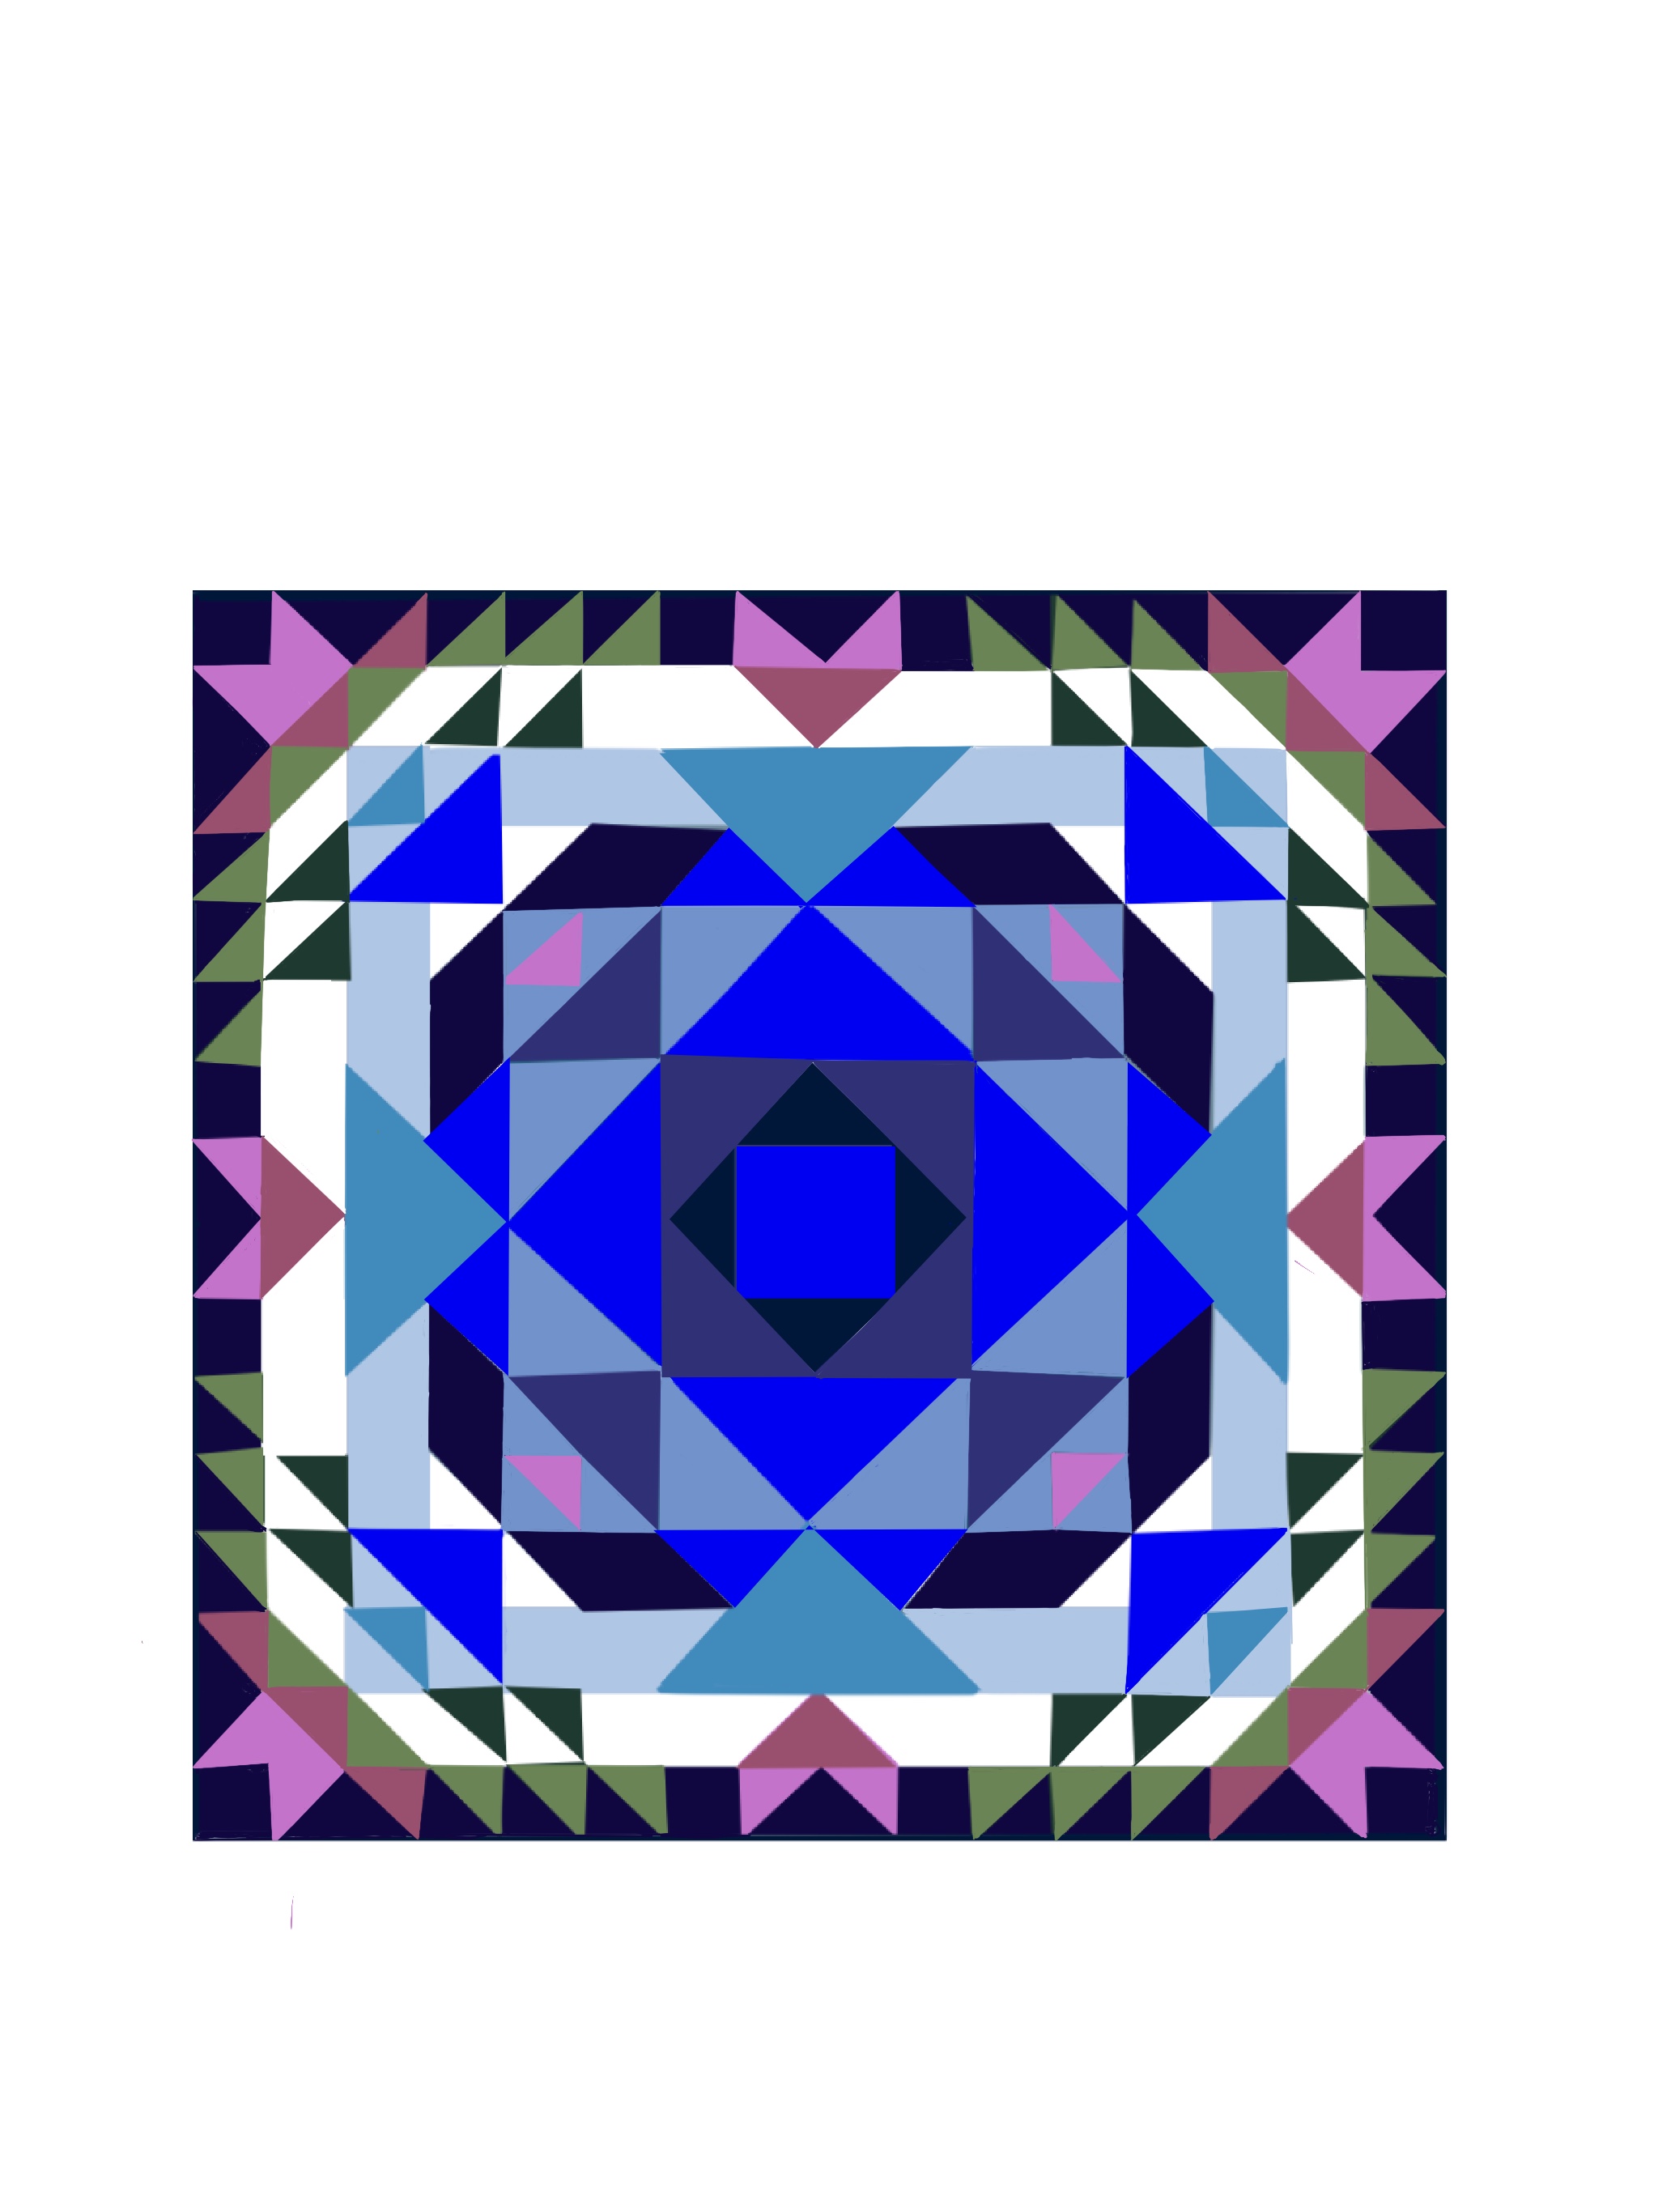 A quilted square with vibrant blue and purple shapes.